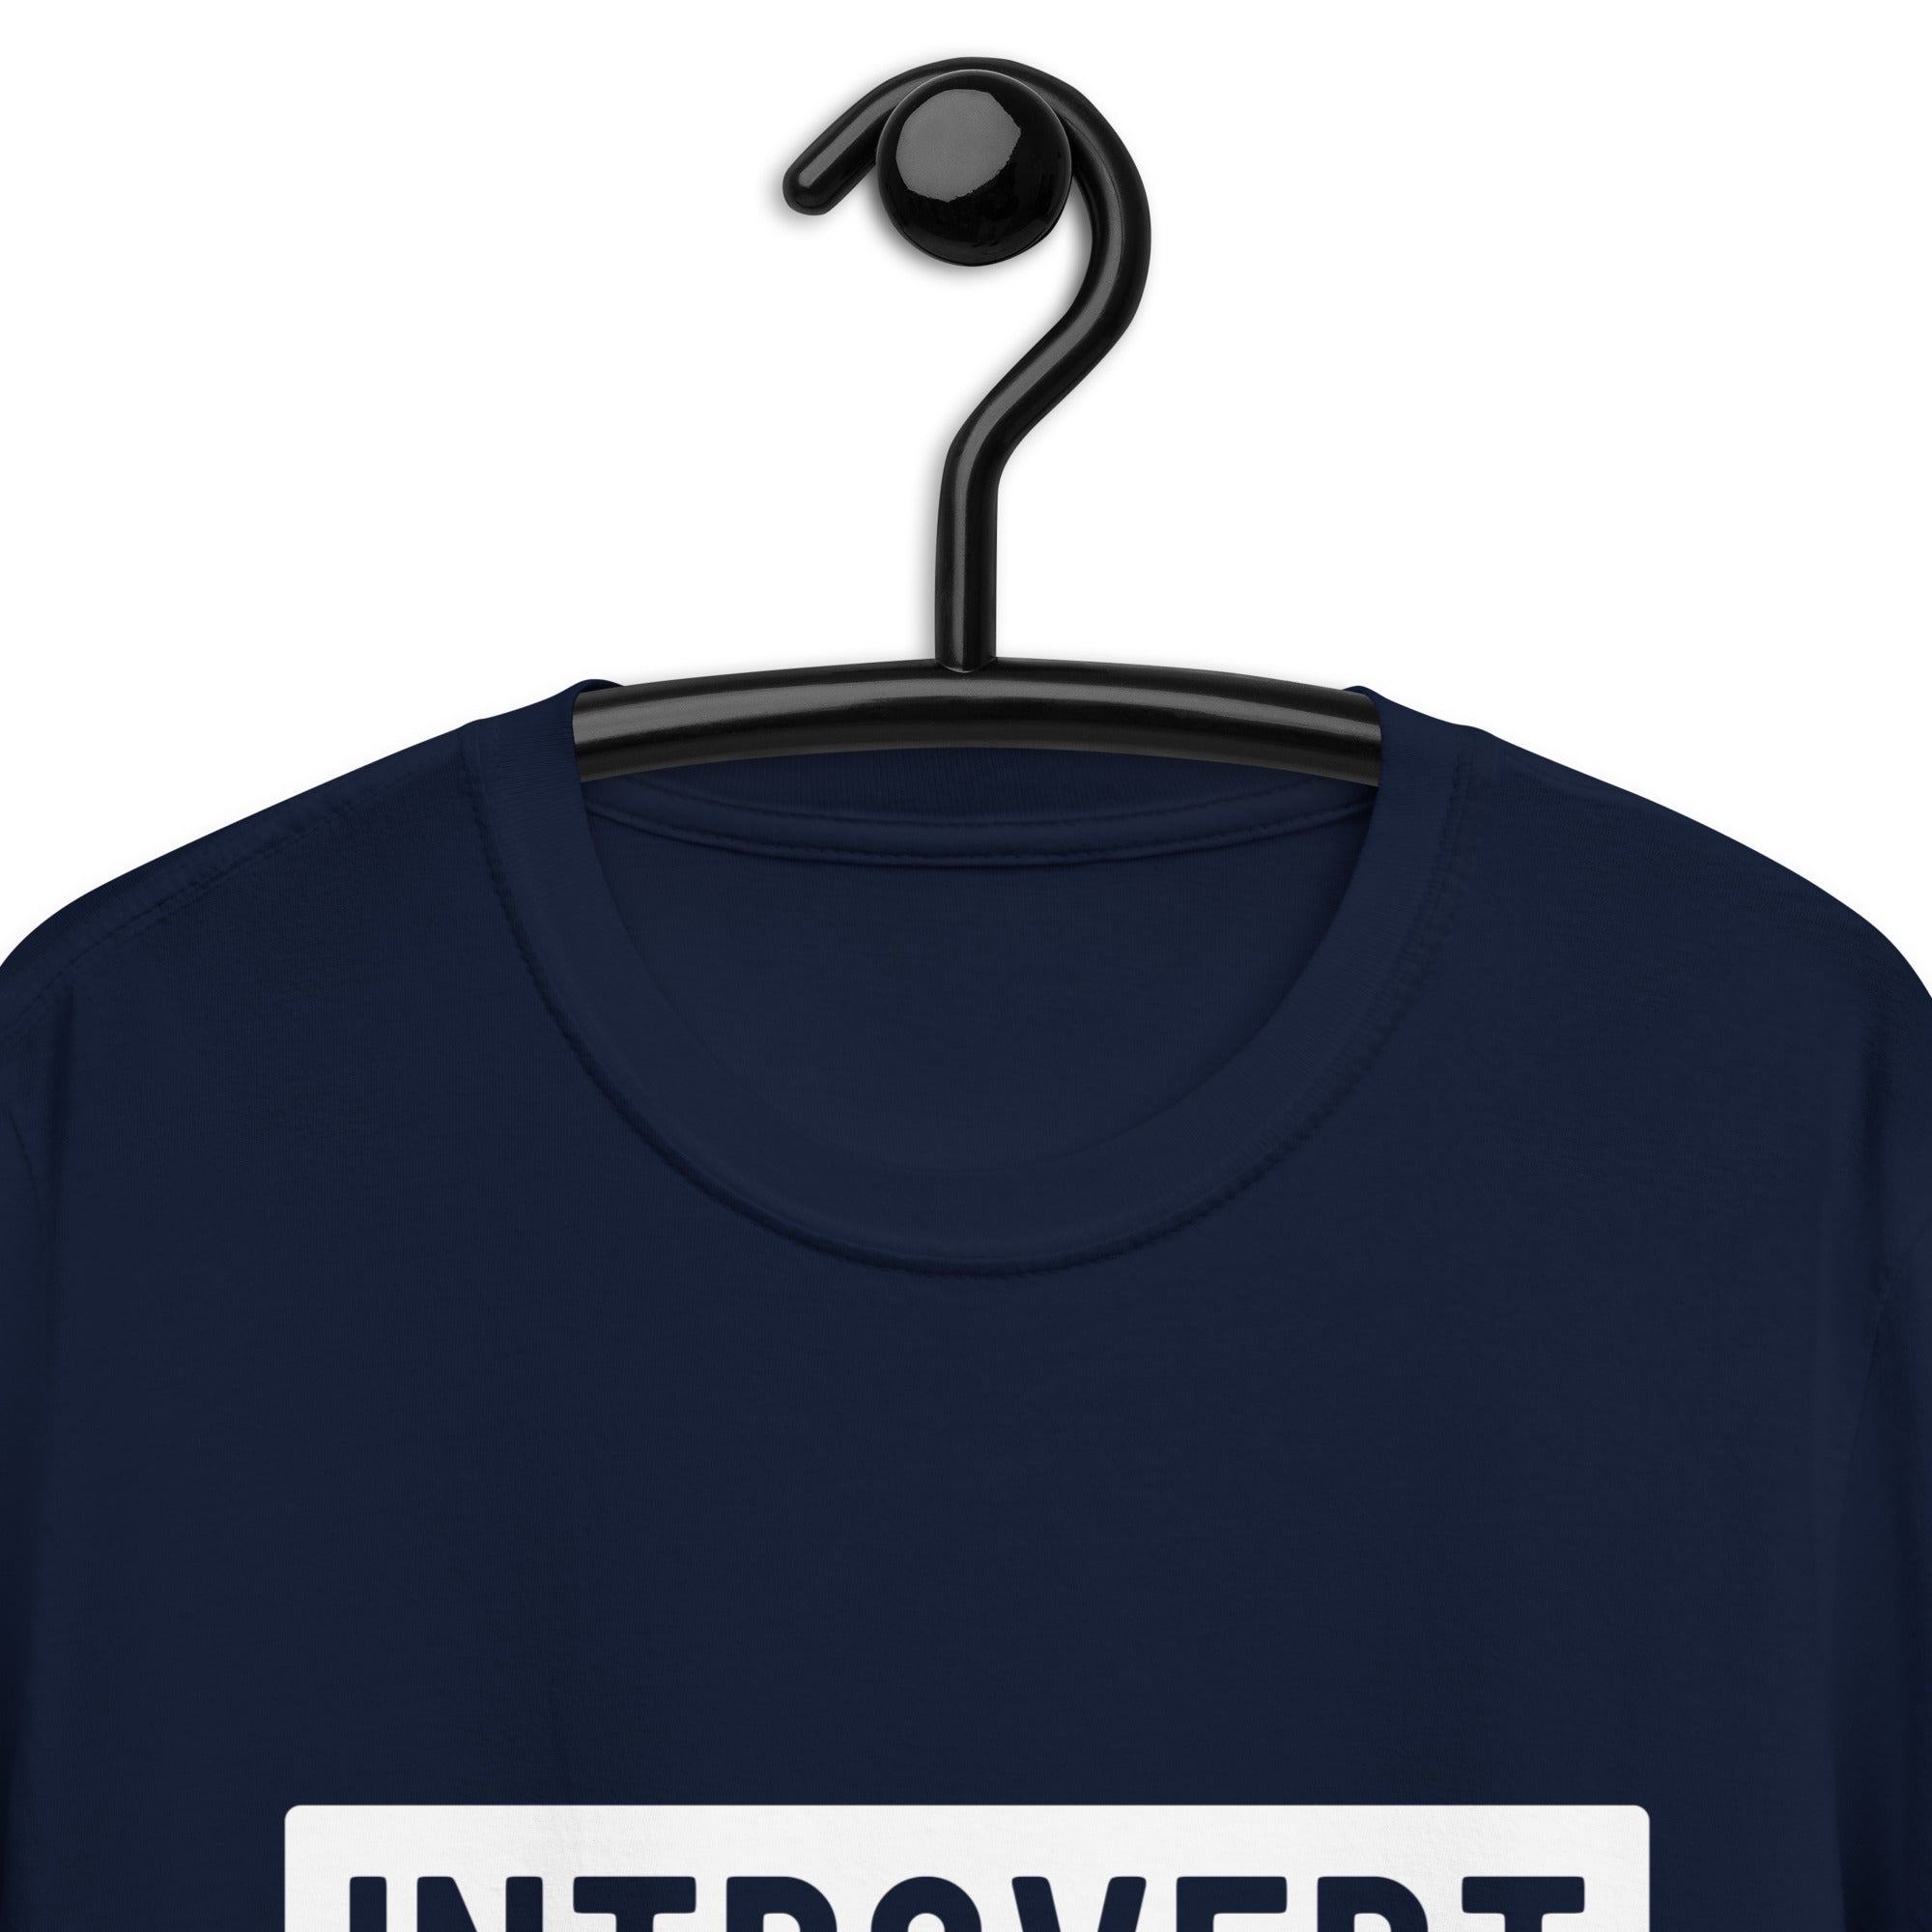 Short-Sleeve Unisex T-Shirt | Introvert but will happily discuss cats